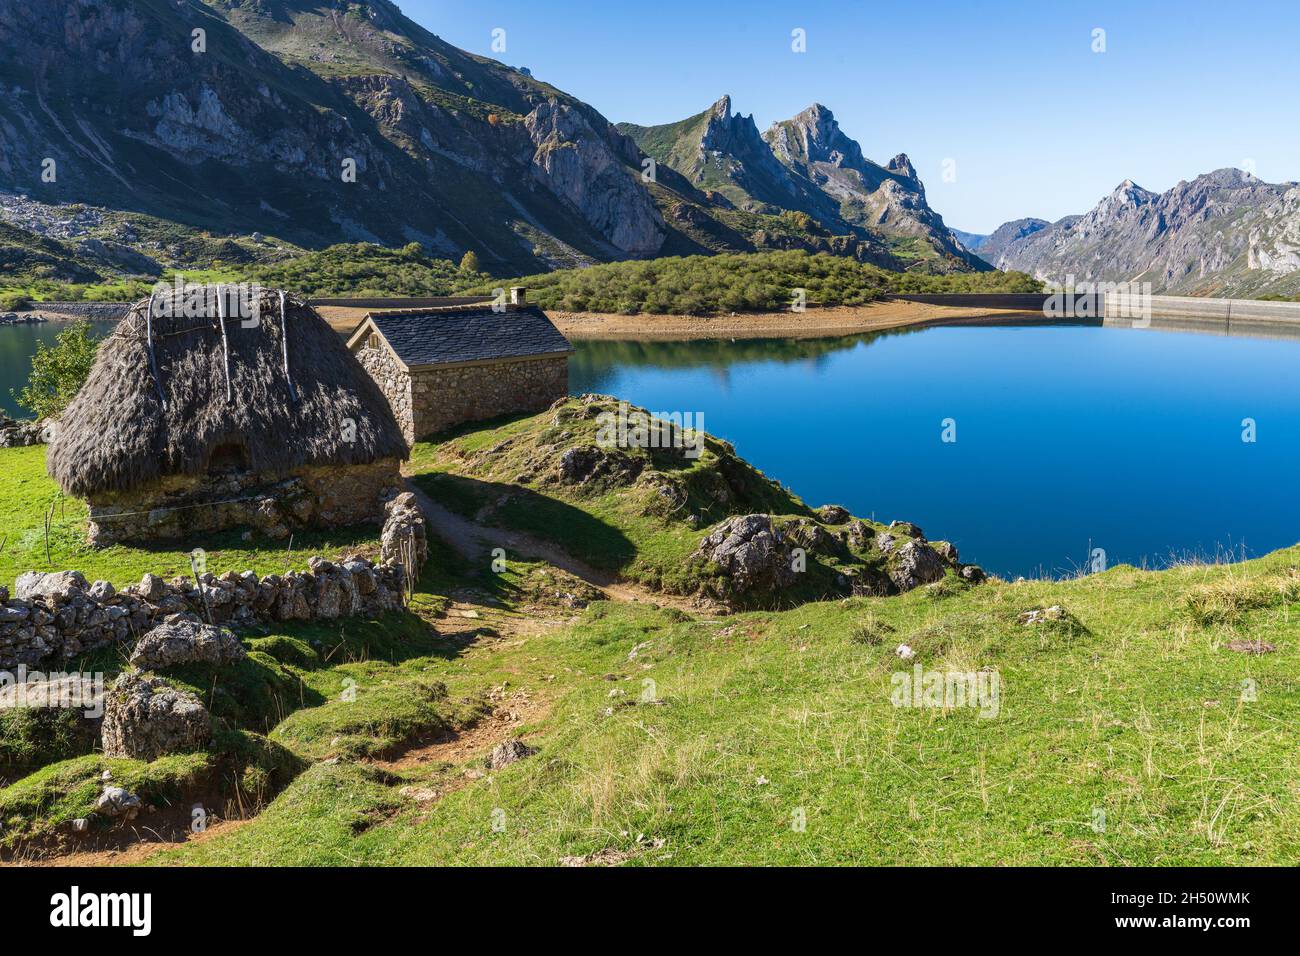 View of the Lake of the Valley in the Somiedo natural park in Asturias.  Stock Photo